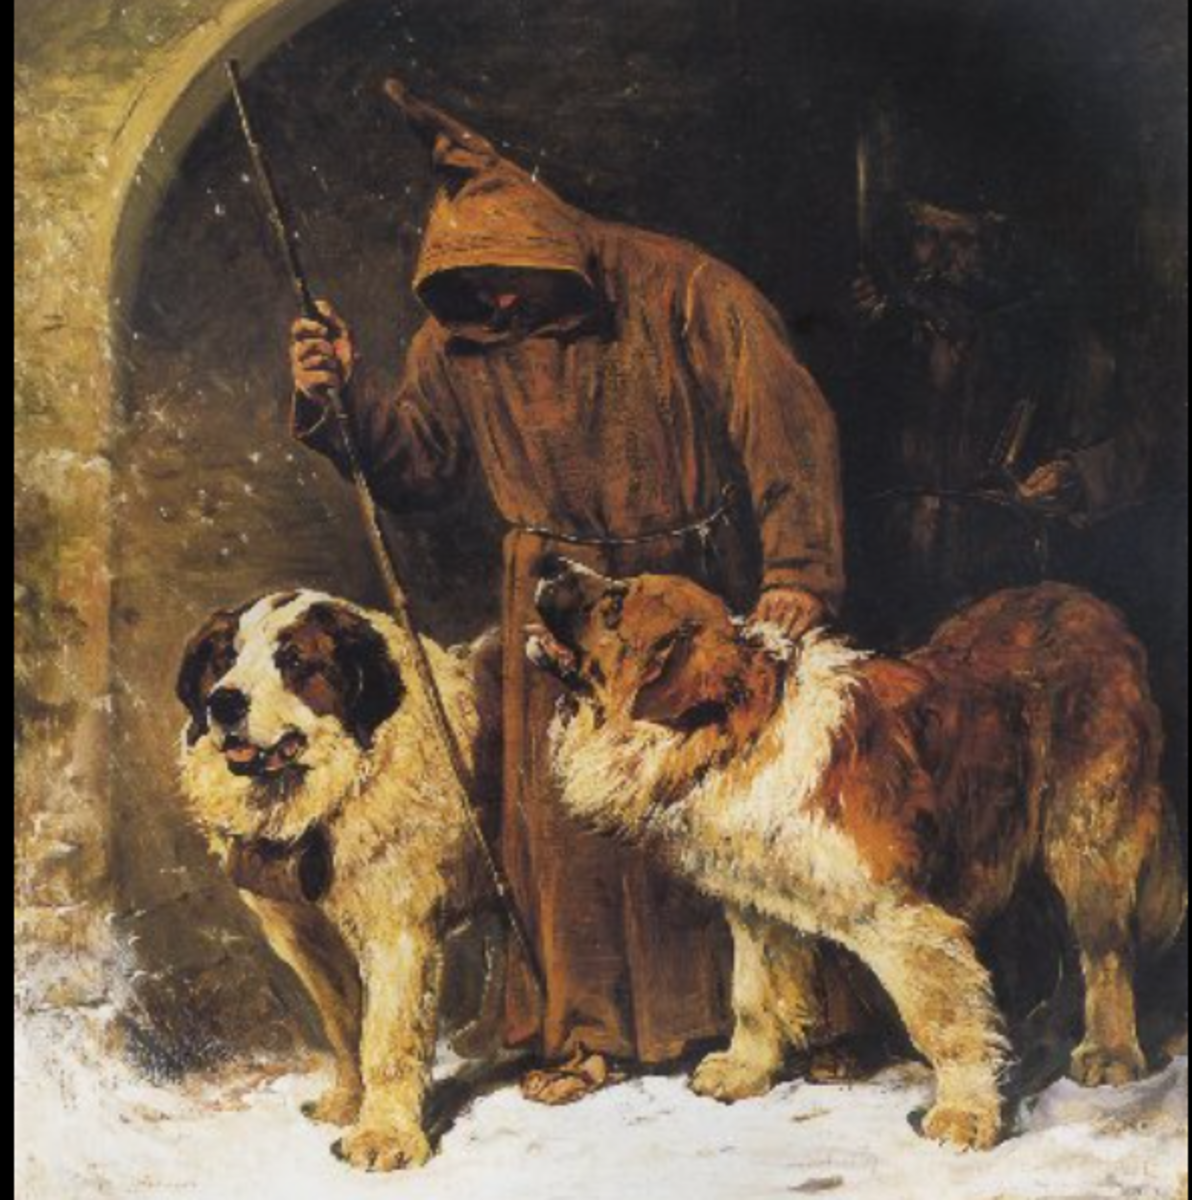 St. Bernards - To The Rescue by John Emms (artist)